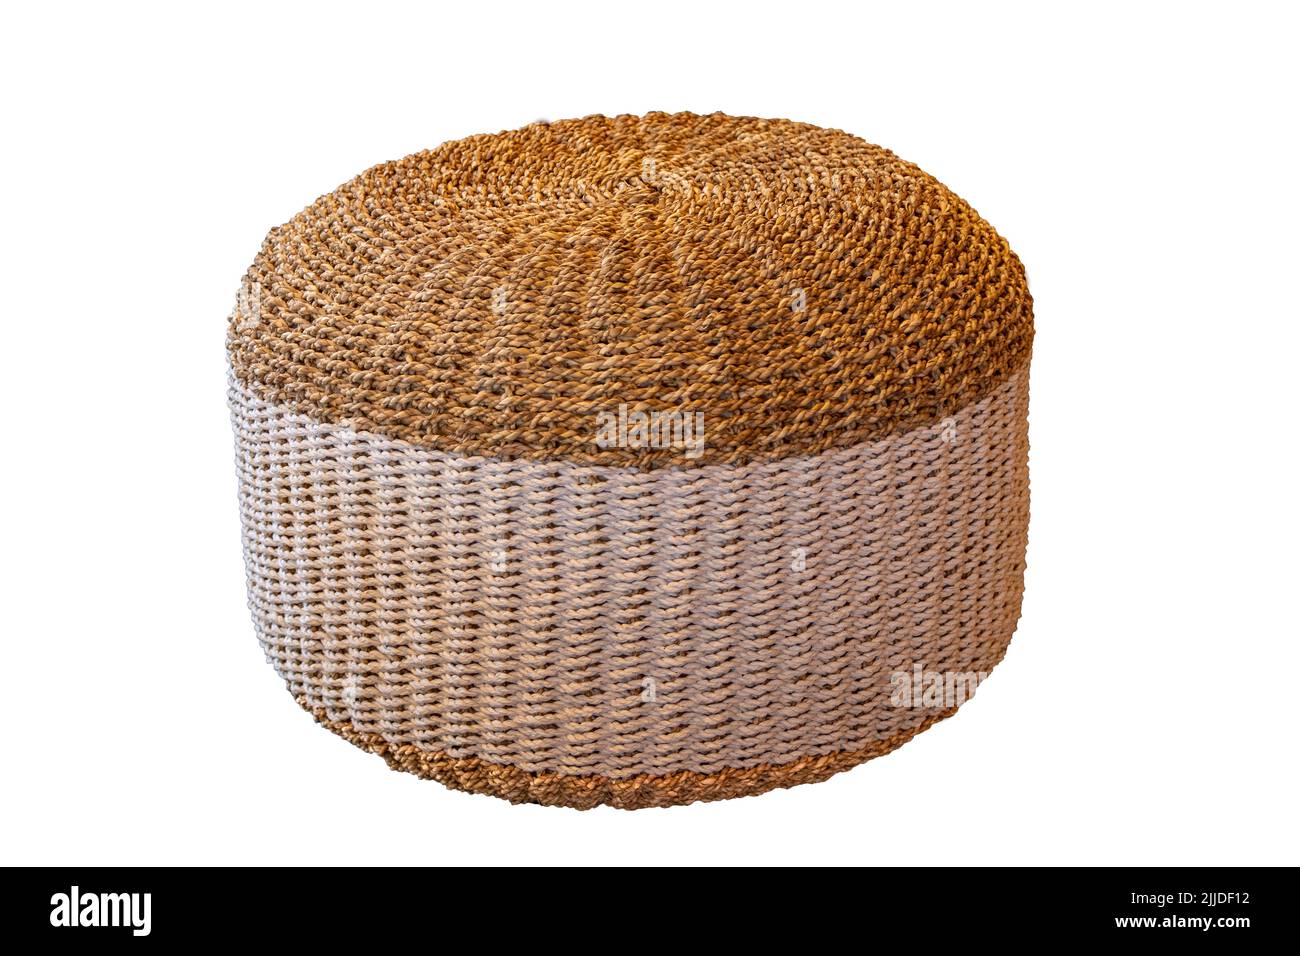 Wicker furniture. Close-up of a wickerwork stool in round shape as seating in hotels and by the pool isolated on a white background. Pool accessories. Stock Photo